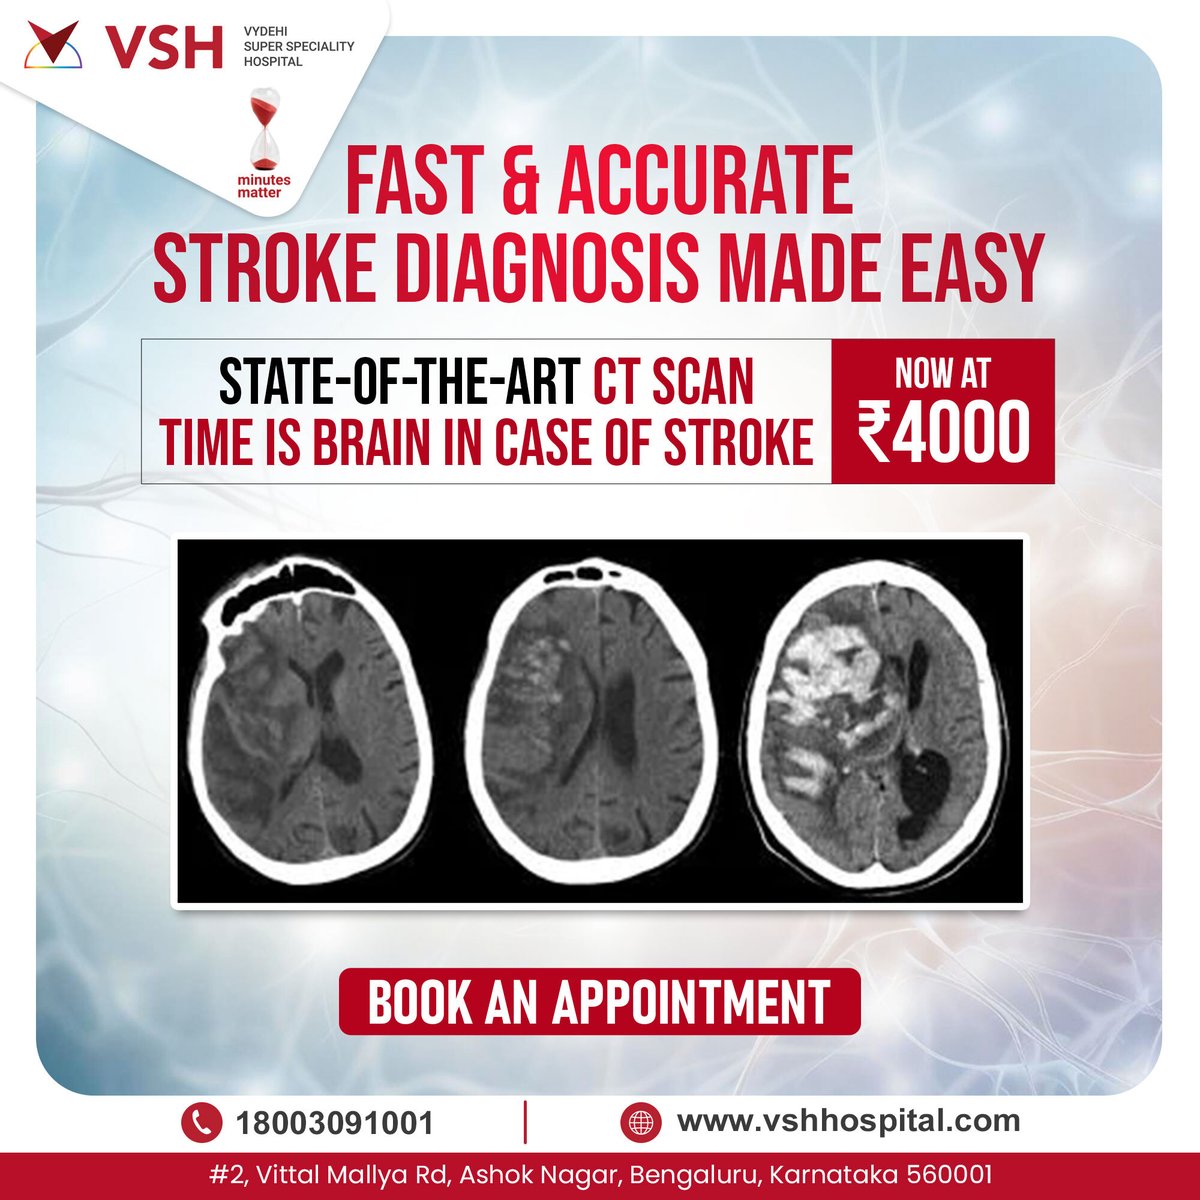 Think you might be having a stroke?  Don't wait! VSH Hospital's fast & accurate CT scans diagnose strokes quickly for effective treatment. Time is brain. ⏱️ Get the care you need. Choose VSH Hospital. #StrokeAwareness #CTScan #VSHHospital
#EverySecondCounts #MinutesMatter